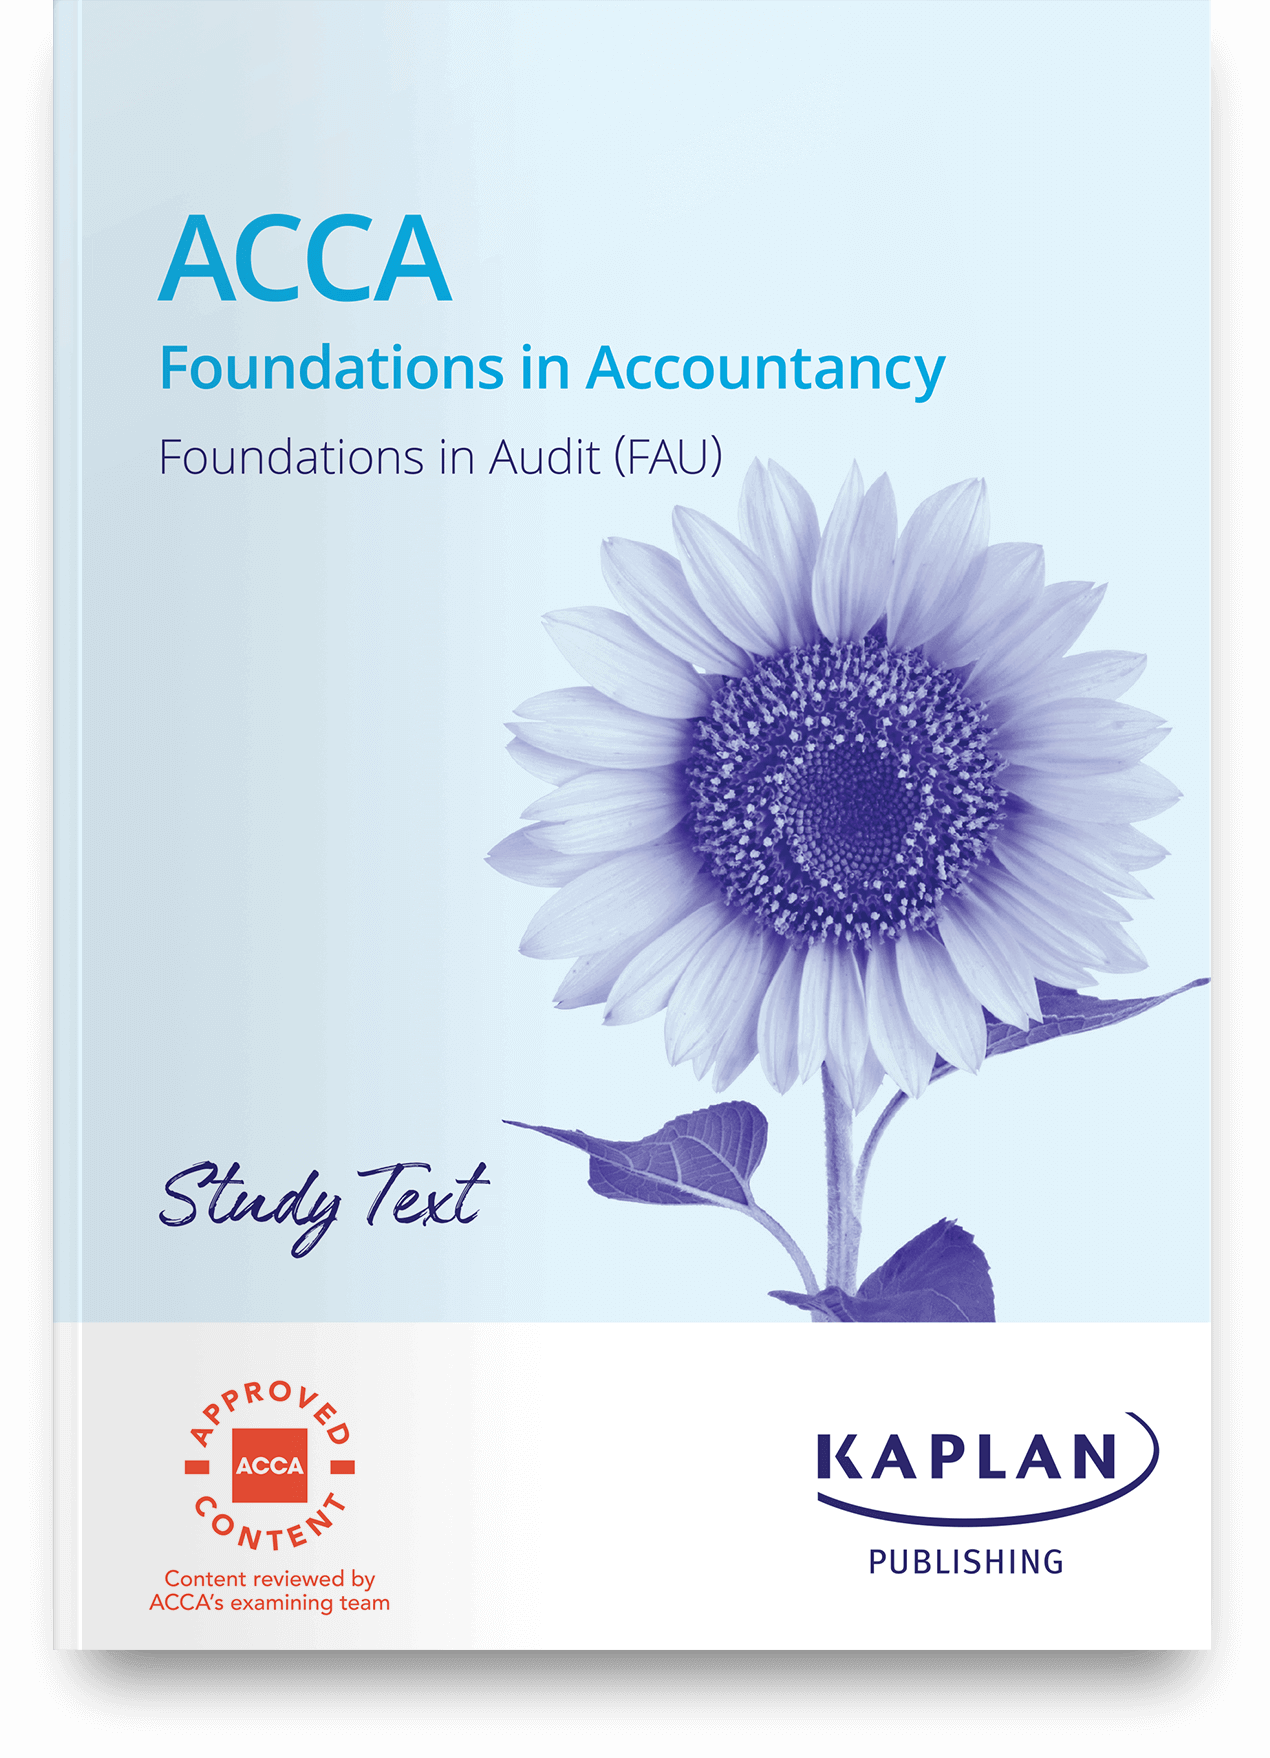 An image of ACCA Foundations in Audit (FAU) Study Text